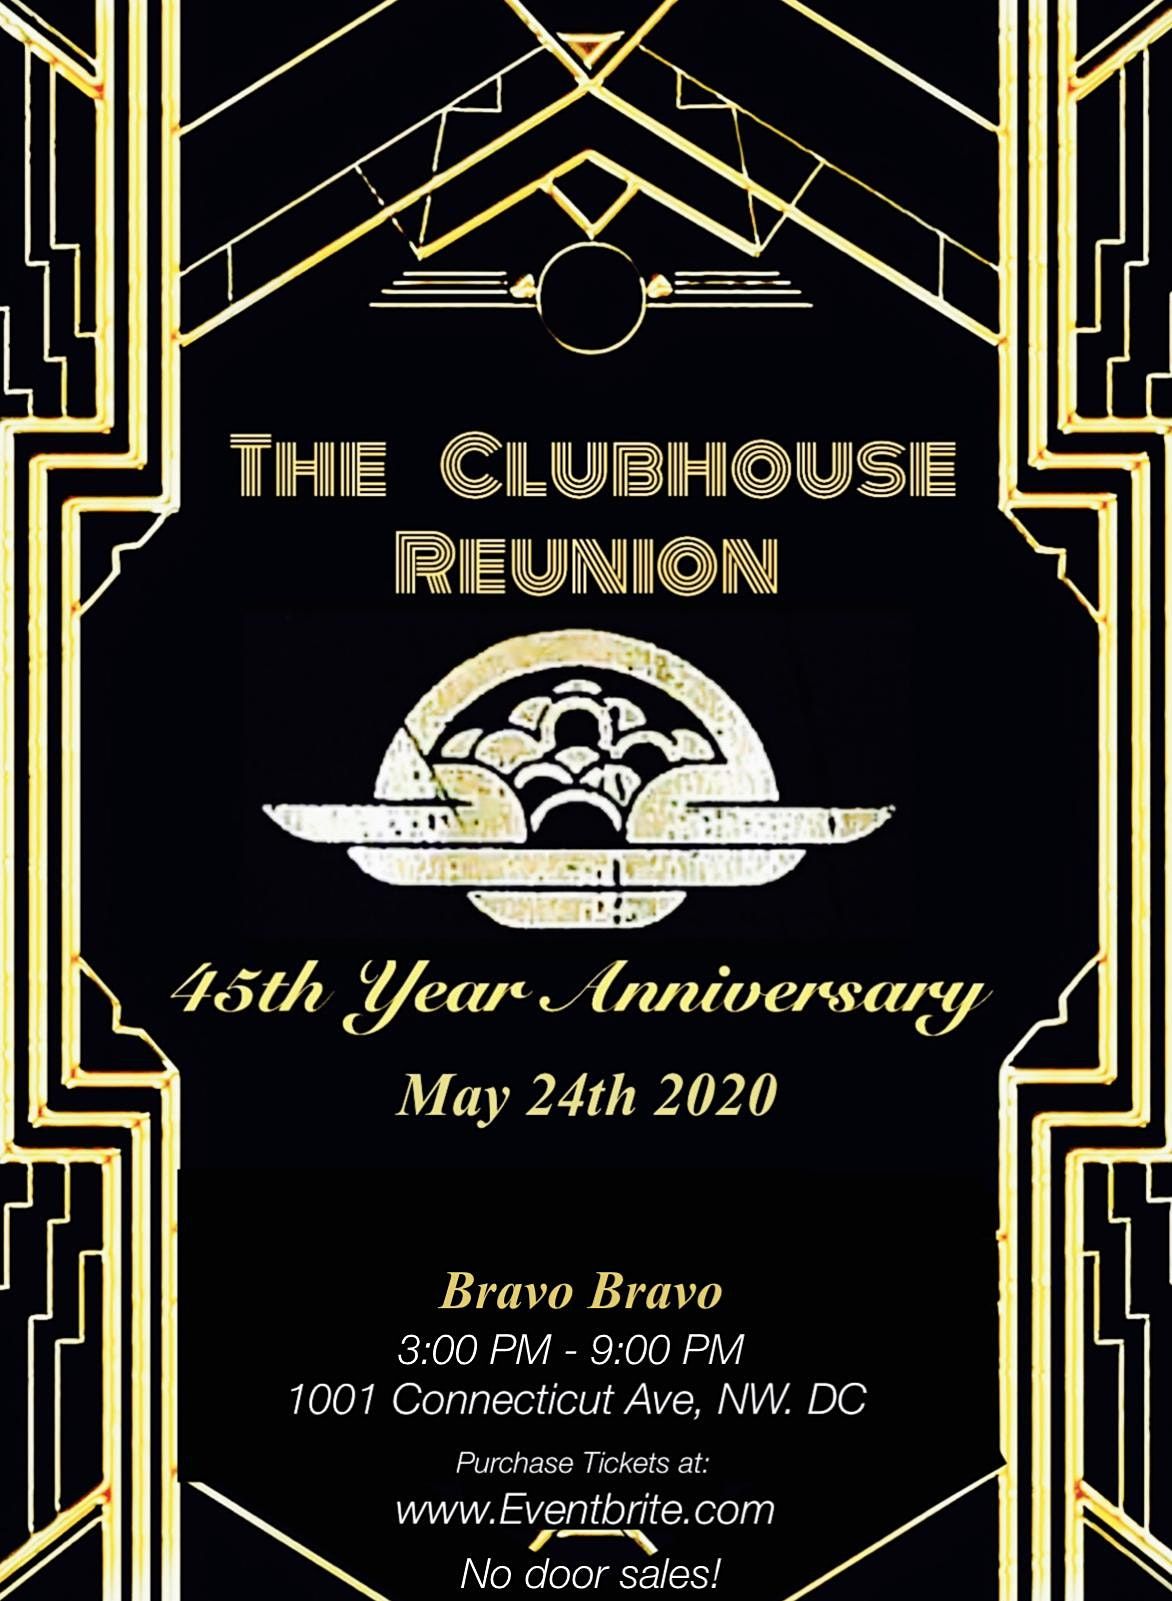 The Clubhouse Reunion - 45th Year Anniversary